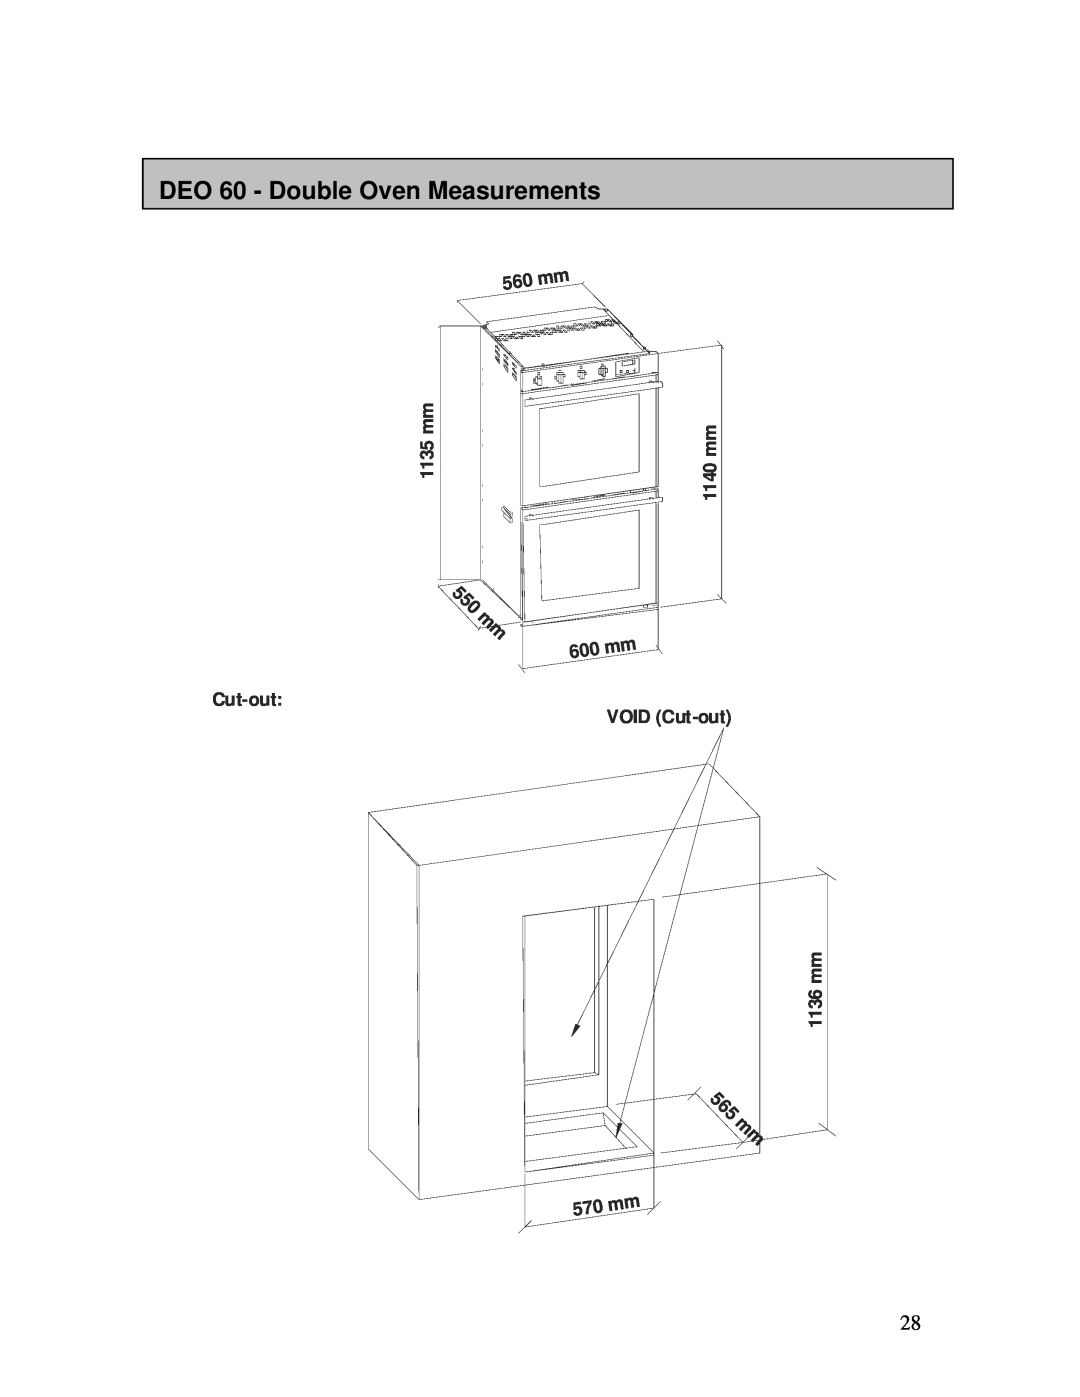 AEG B3007H-L-B user manual DEO 60 - Double Oven Measurements, 5 6 5 m m, 1135 mm, 1140 mm, Cut-out VOID Cut-out 1136 mm 